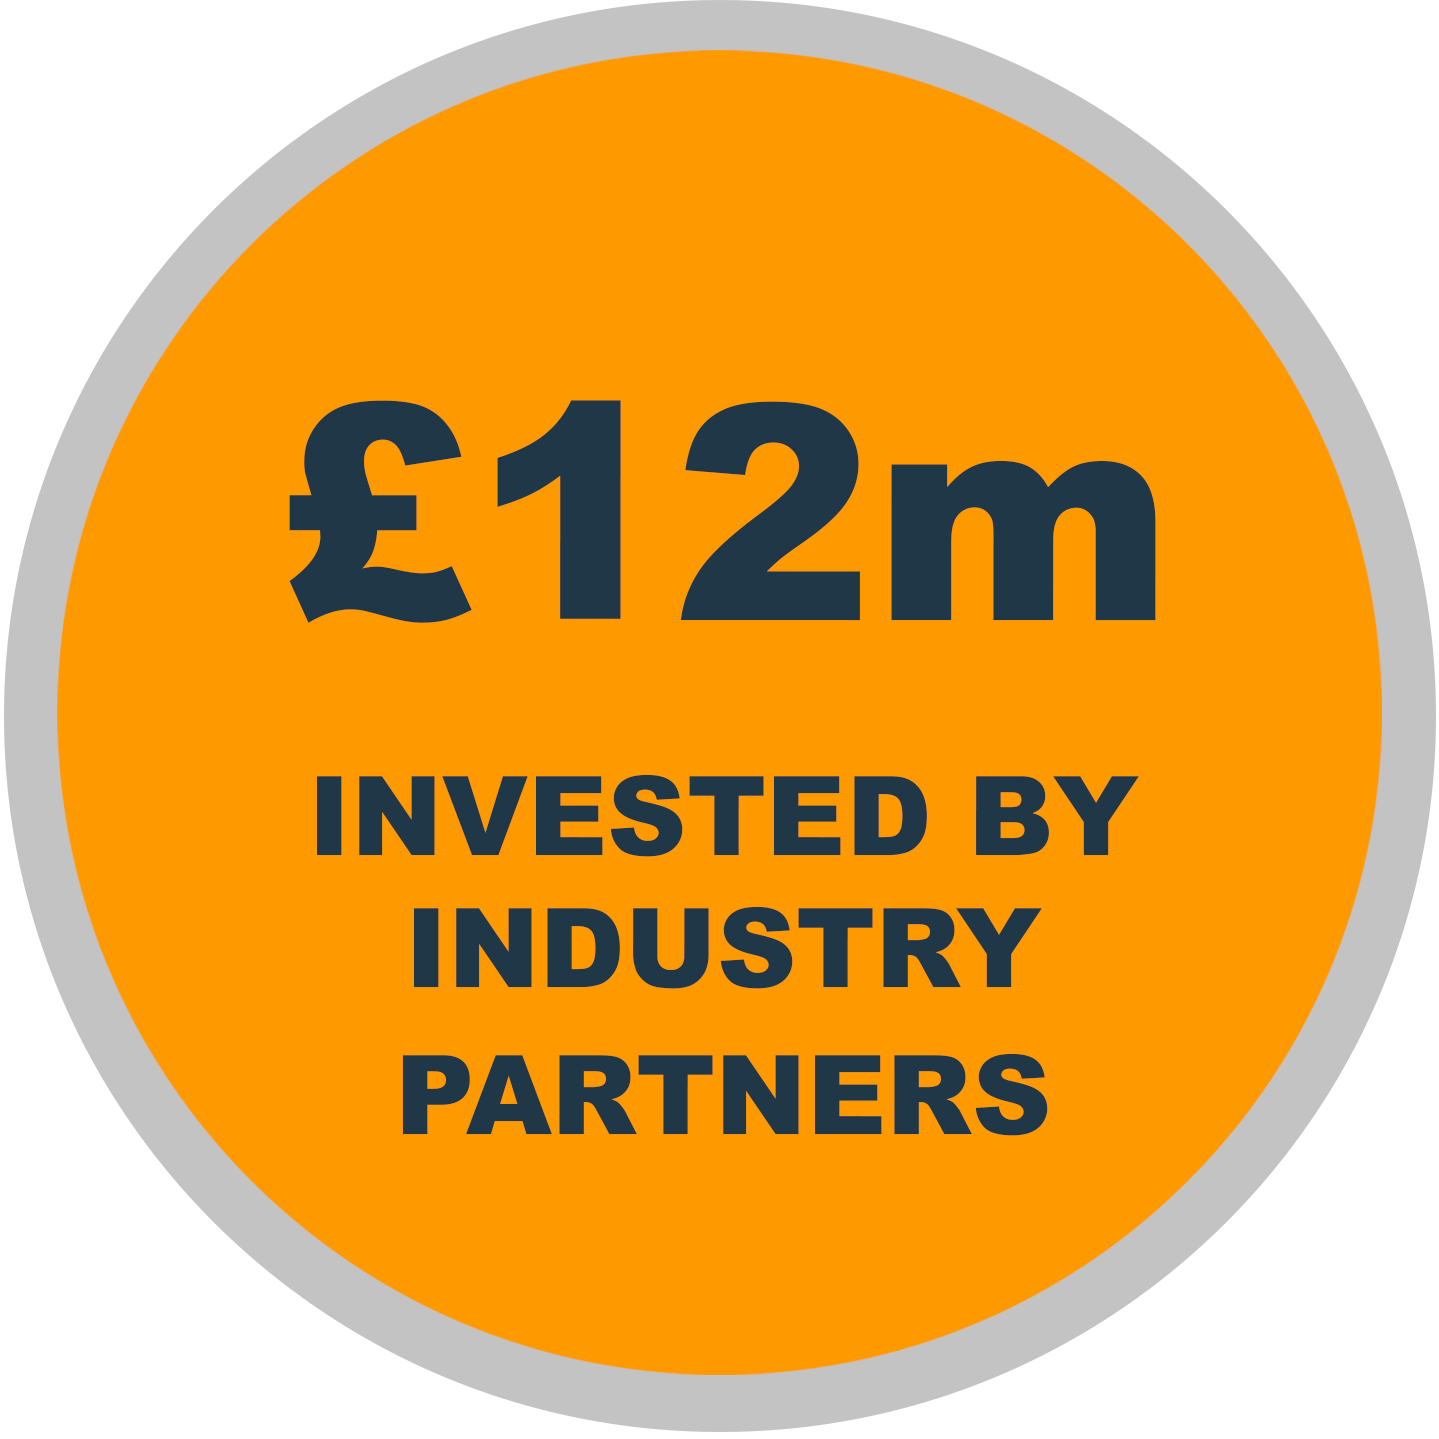 Over 9m Invested by industry partners